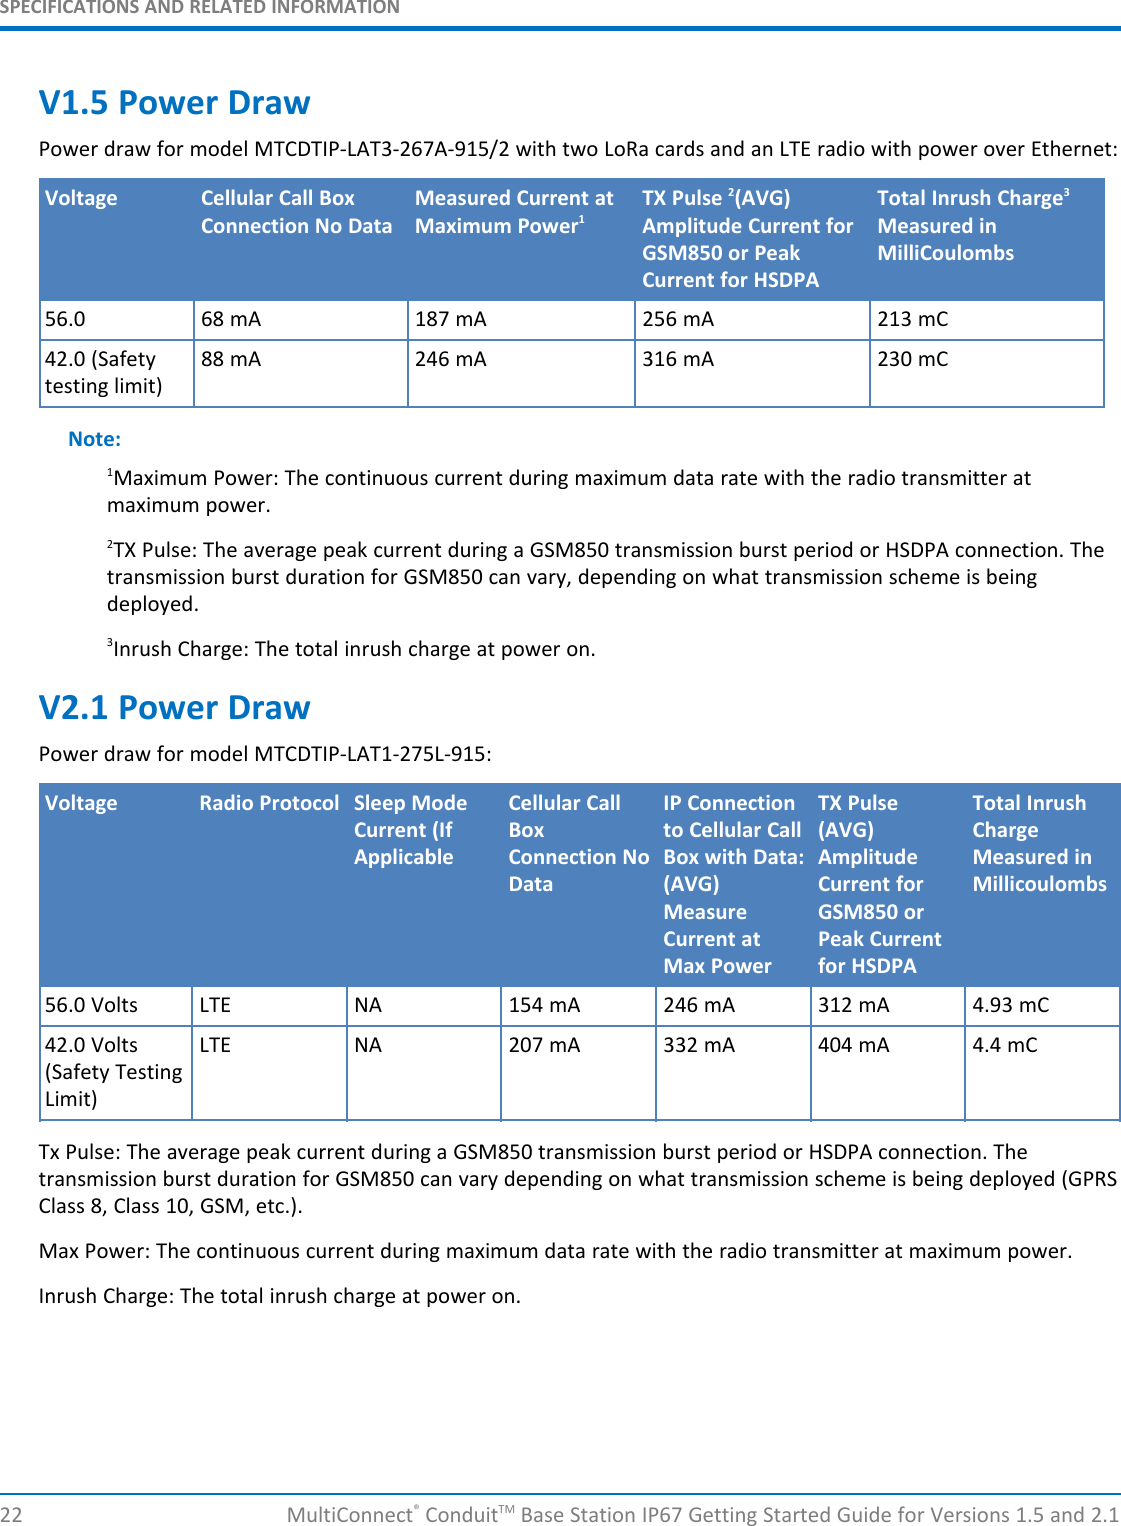 SPECIFICATIONS AND RELATED INFORMATION22 MultiConnect®ConduitTM Base Station IP67 Getting Started Guide for Versions 1.5 and 2.1V1.5 Power DrawPower draw for model MTCDTIP-LAT3-267A-915/2 with two LoRa cards and an LTE radio with power over Ethernet:Voltage Cellular Call BoxConnection No DataMeasured Current atMaximum Power1TX Pulse 2(AVG)Amplitude Current forGSM850 or PeakCurrent for HSDPATotal Inrush Charge3Measured inMilliCoulombs56.0 68 mA 187 mA 256 mA 213 mC42.0 (Safetytesting limit)88 mA 246 mA 316 mA 230 mCNote:1Maximum Power: The continuous current during maximum data rate with the radio transmitter atmaximum power.2TX Pulse: The average peak current during a GSM850 transmission burst period or HSDPA connection. Thetransmission burst duration for GSM850 can vary, depending on what transmission scheme is beingdeployed.3Inrush Charge: The total inrush charge at power on.V2.1 Power DrawPower draw for model MTCDTIP-LAT1-275L-915:Voltage Radio Protocol Sleep ModeCurrent (IfApplicableCellular CallBoxConnection NoDataIP Connectionto Cellular CallBox with Data:(AVG)MeasureCurrent atMax PowerTX Pulse(AVG)AmplitudeCurrent forGSM850 orPeak Currentfor HSDPATotal InrushChargeMeasured inMillicoulombs56.0 Volts LTE NA 154 mA 246 mA 312 mA 4.93 mC42.0 Volts(Safety TestingLimit)LTE NA 207 mA 332 mA 404 mA 4.4 mCTx Pulse: The average peak current during a GSM850 transmission burst period or HSDPA connection. Thetransmission burst duration for GSM850 can vary depending on what transmission scheme is being deployed (GPRSClass 8, Class 10, GSM, etc.).Max Power: The continuous current during maximum data rate with the radio transmitter at maximum power.Inrush Charge: The total inrush charge at power on.